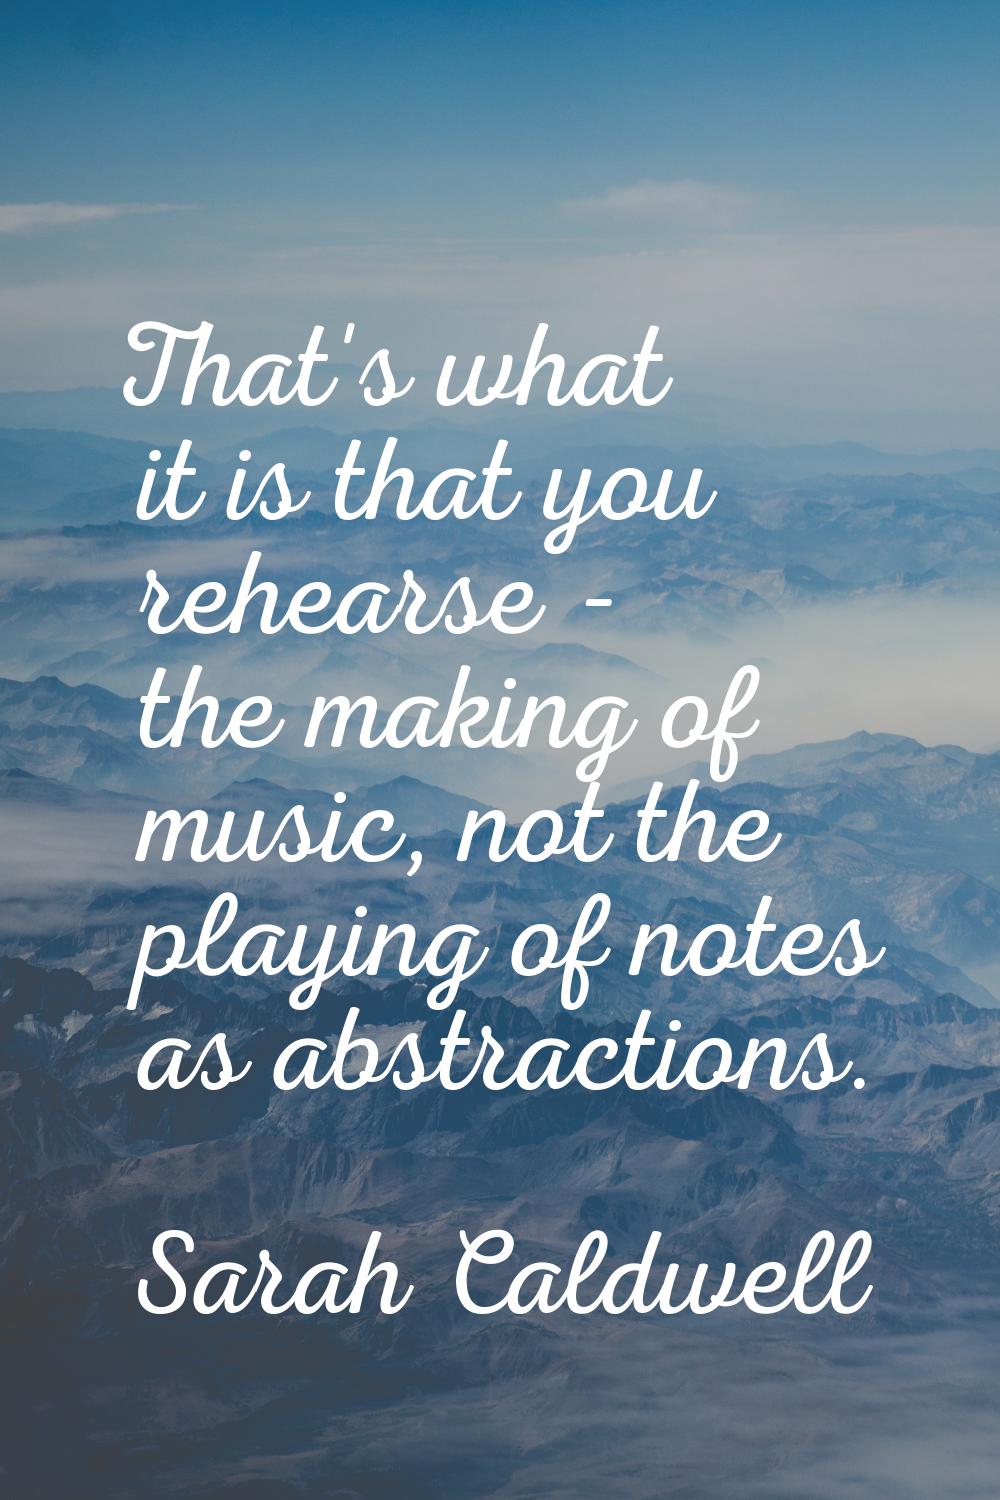 That's what it is that you rehearse - the making of music, not the playing of notes as abstractions